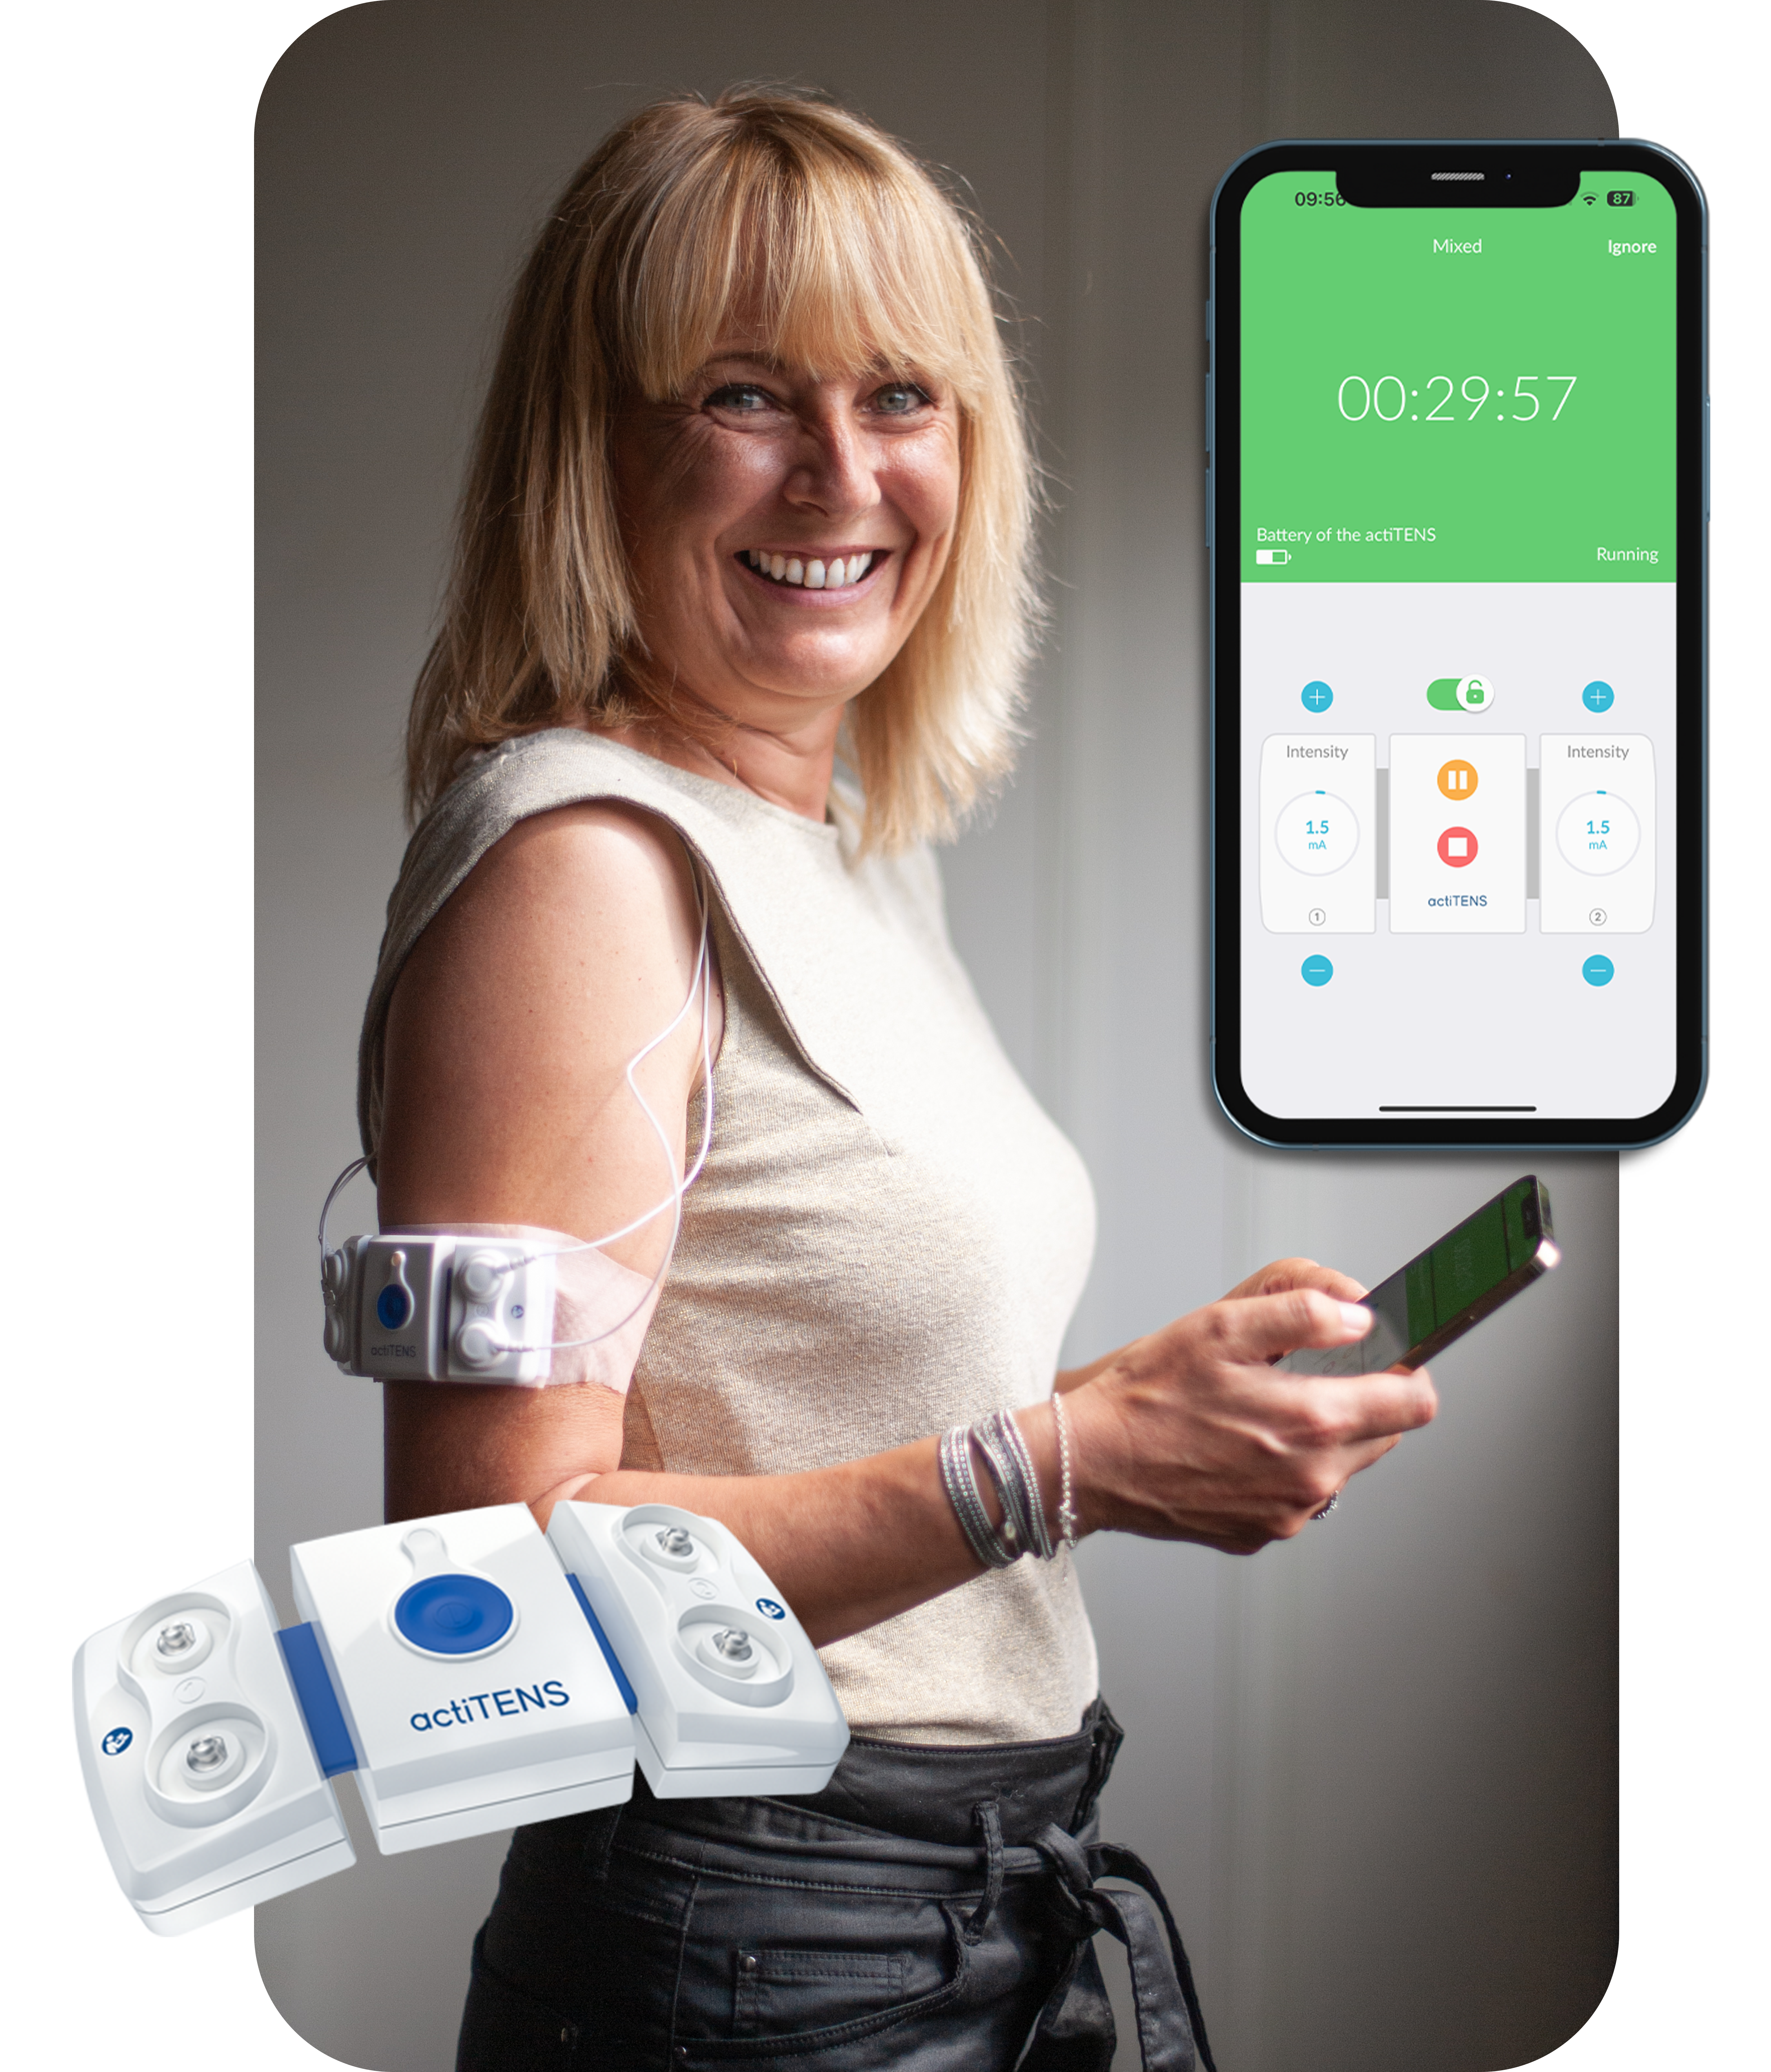 Discover advanced pain relief with actiTENS. A woman wears actiTENS for arm stimulation, discreetly managing pain while holding her phone to launch the TENS or EMS program. Discover the modern approach to pain management with actiTENS' innovative, drug-free and effective technology.